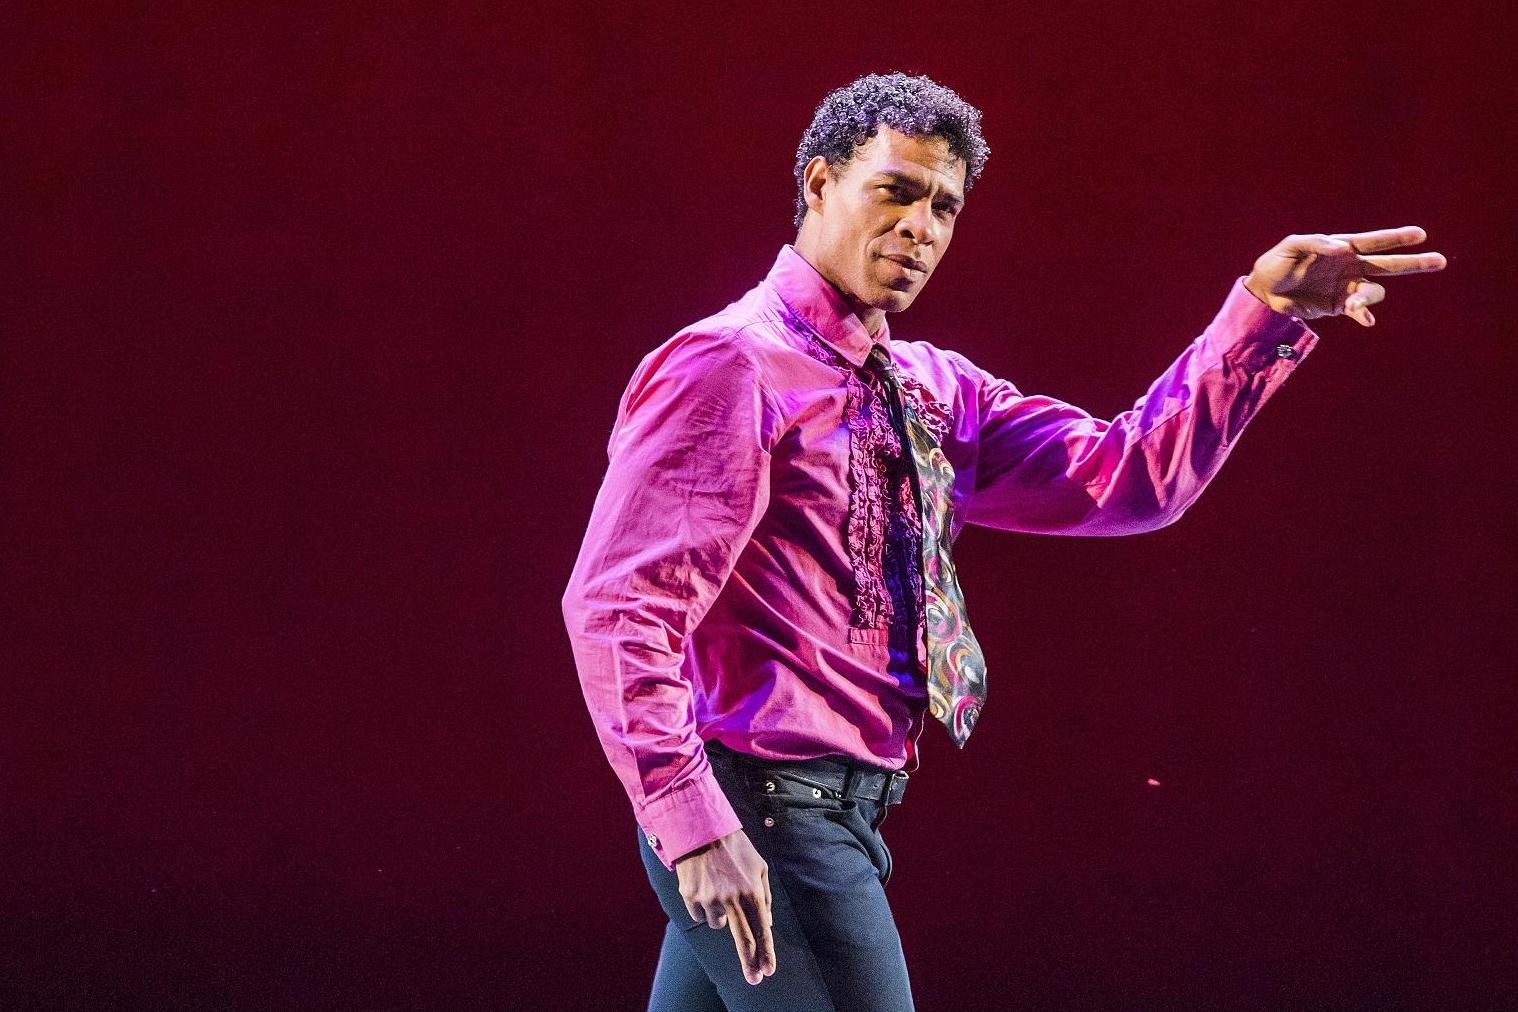 Carlos Acosta in Rooster by Christopher Bruce, as part of Carlos Acosta: A Celebration at the Royal Albert Hall.